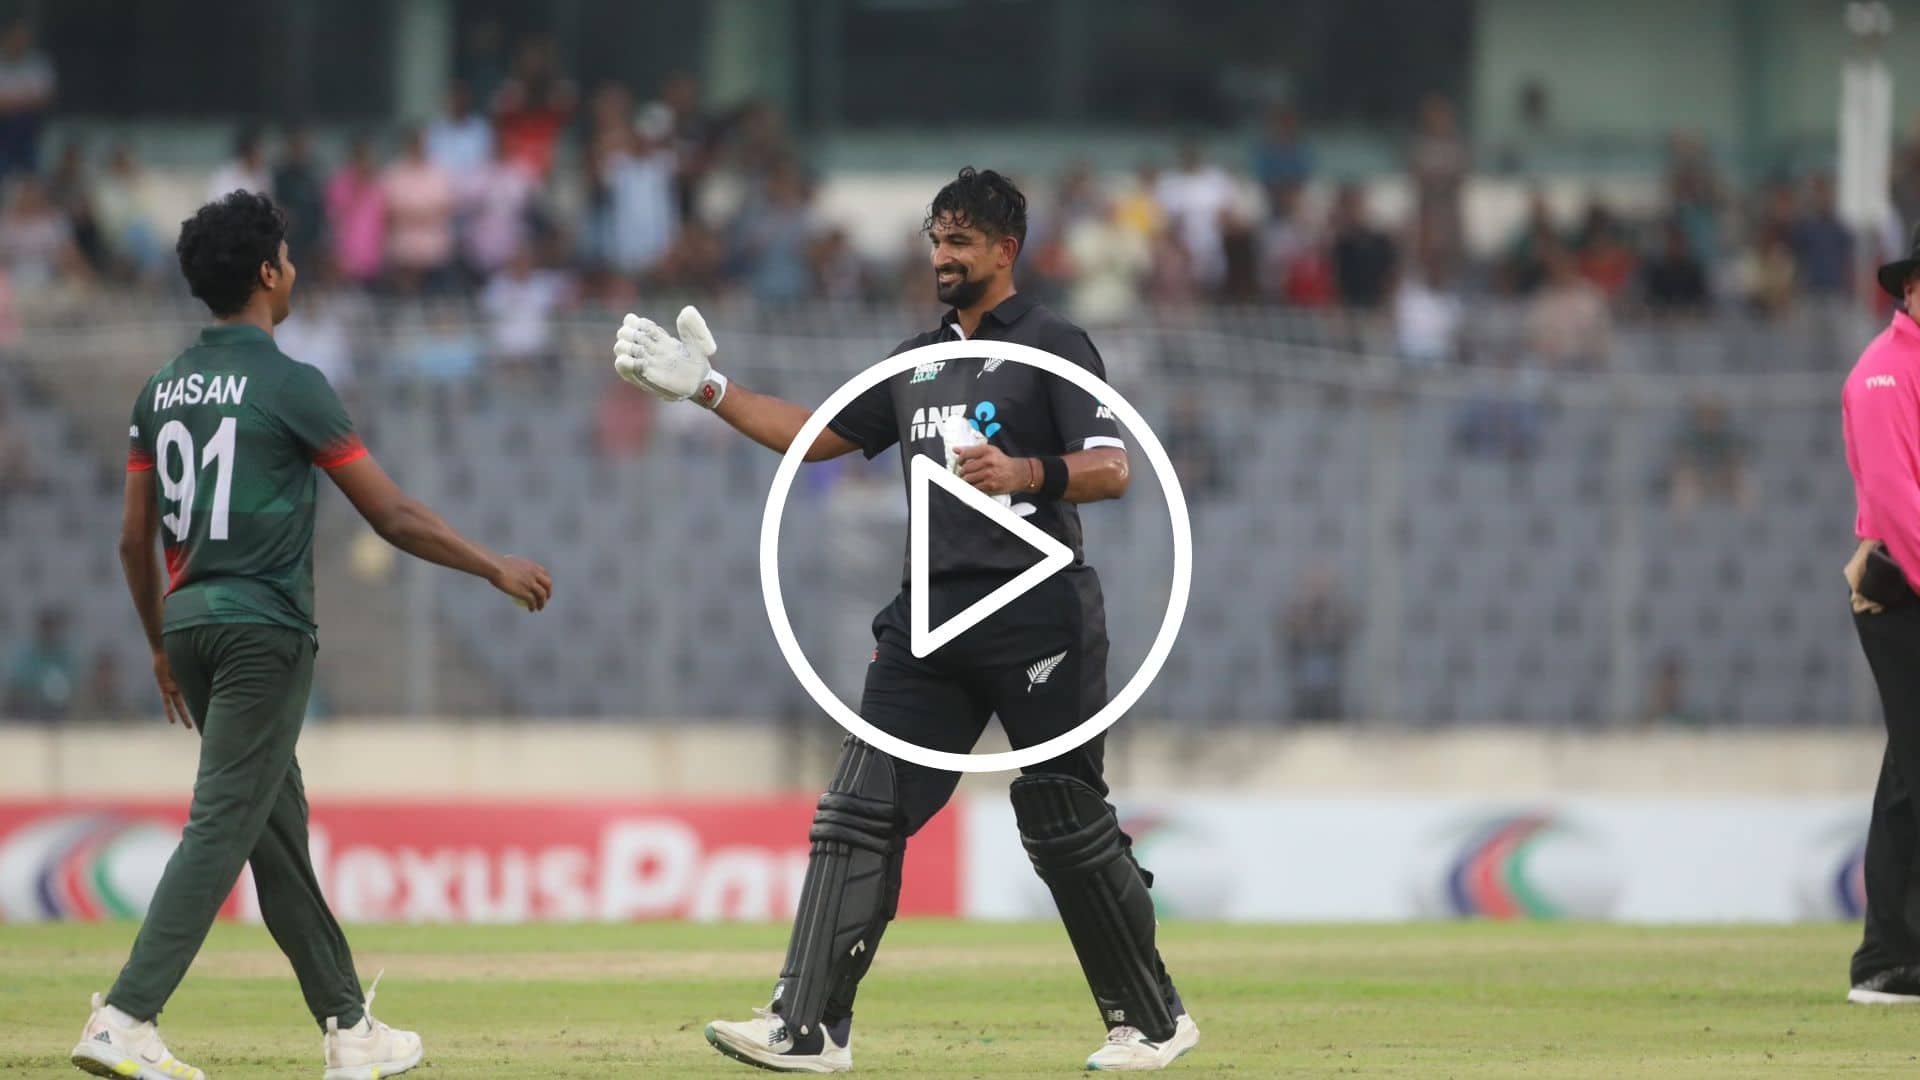 [Watch] Ish Sodhi Hugs Bangladesh's Hasan Mahmud As He Gets Another Chance After Mankading